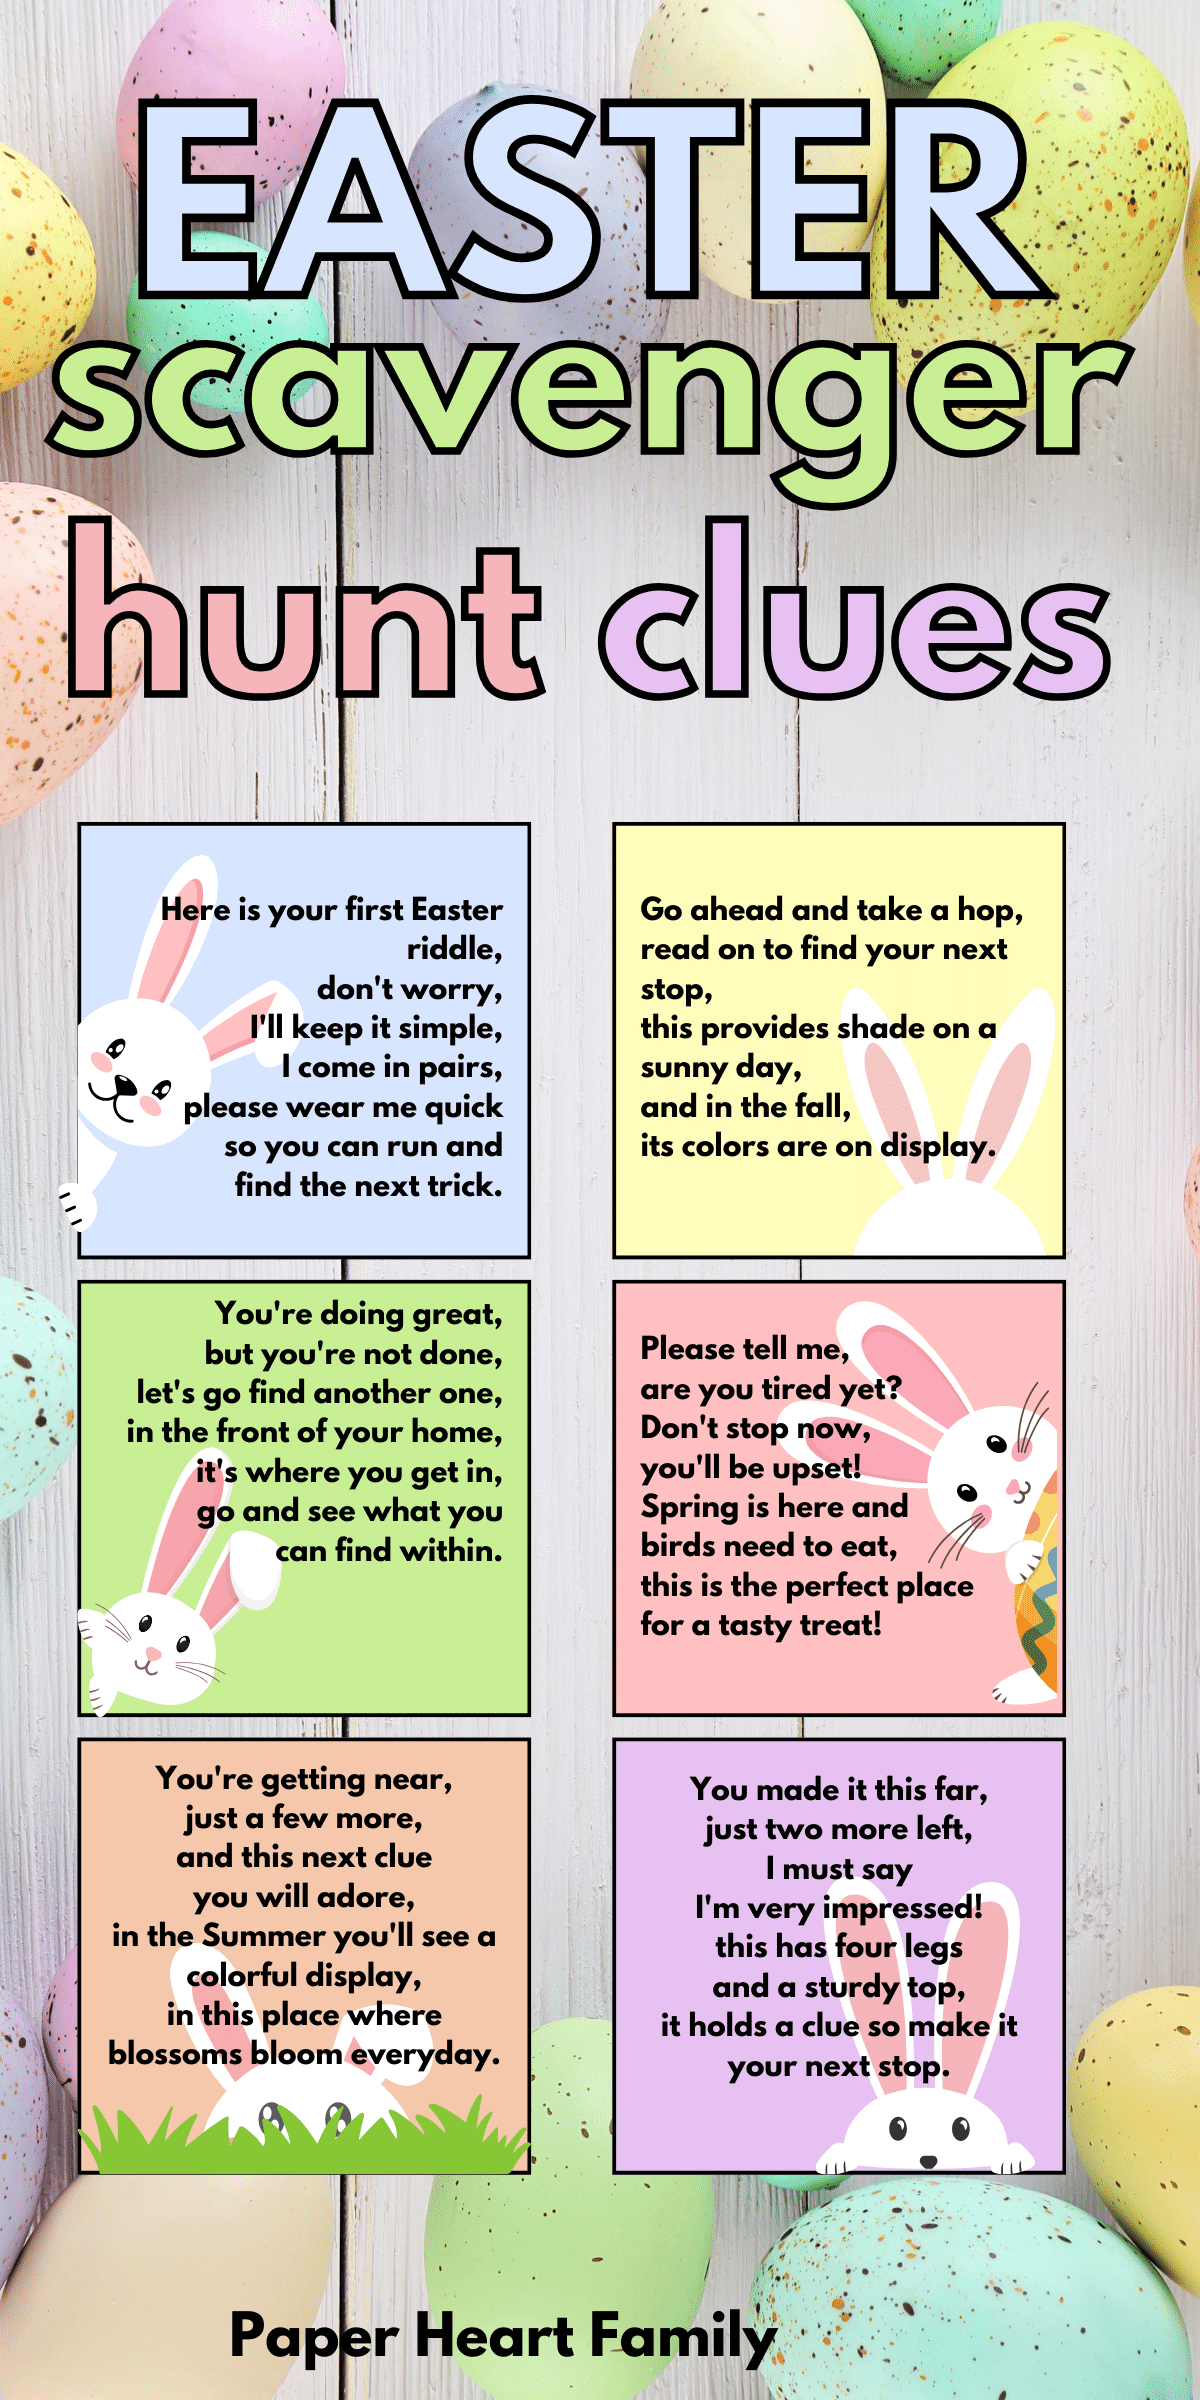 8 clues in pastel colors